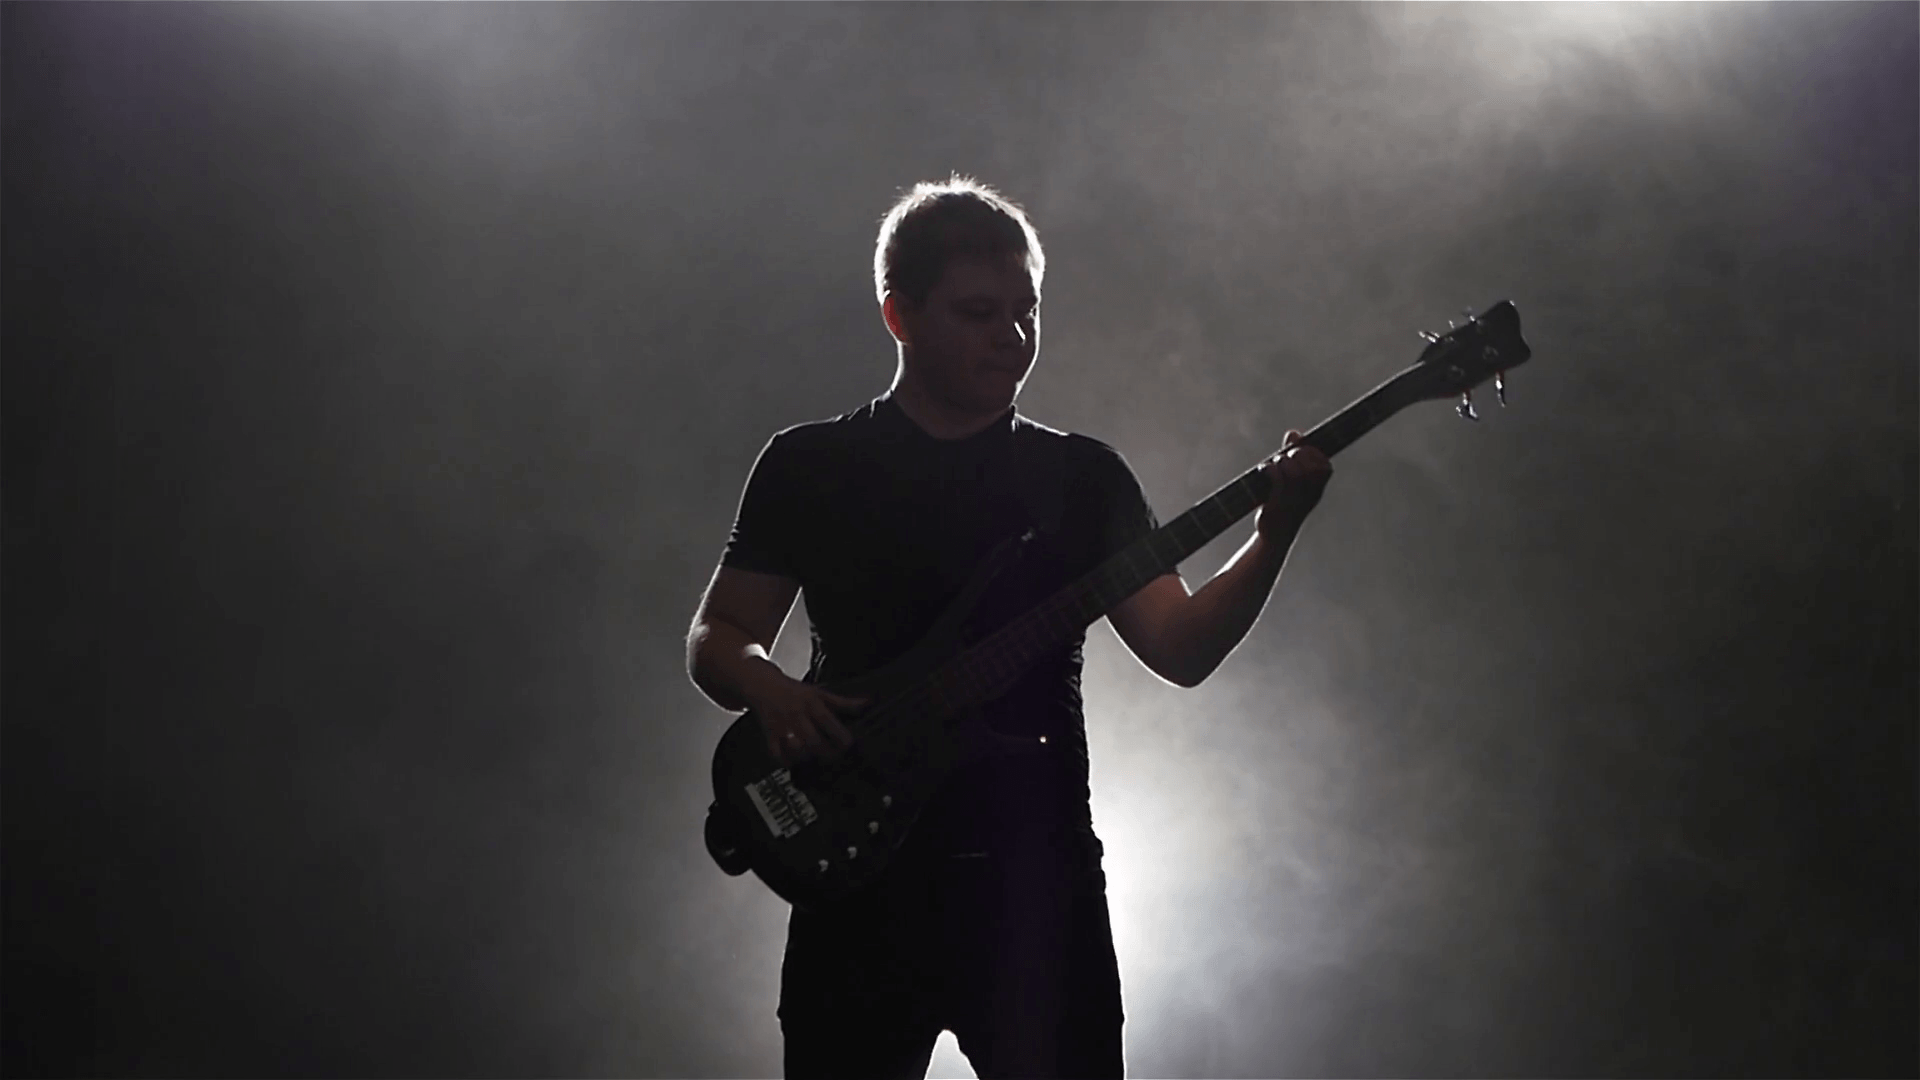 Playing man on black bass guitar. Dark background with backlight